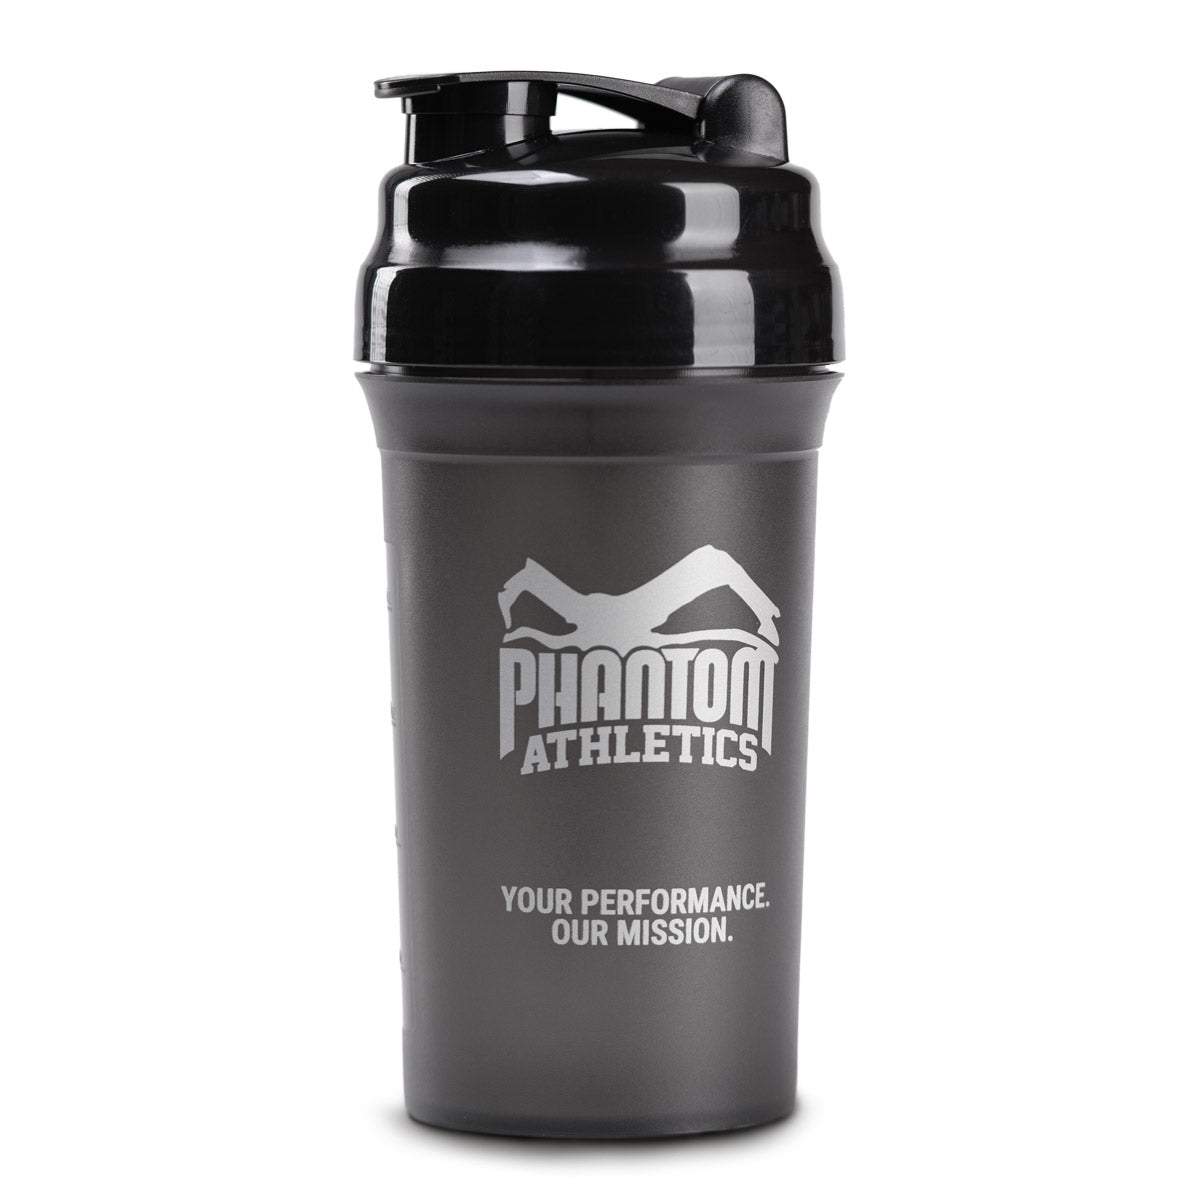 The Phantom Athletics Shaker for protein shakes and other nutritional supplements in martial arts